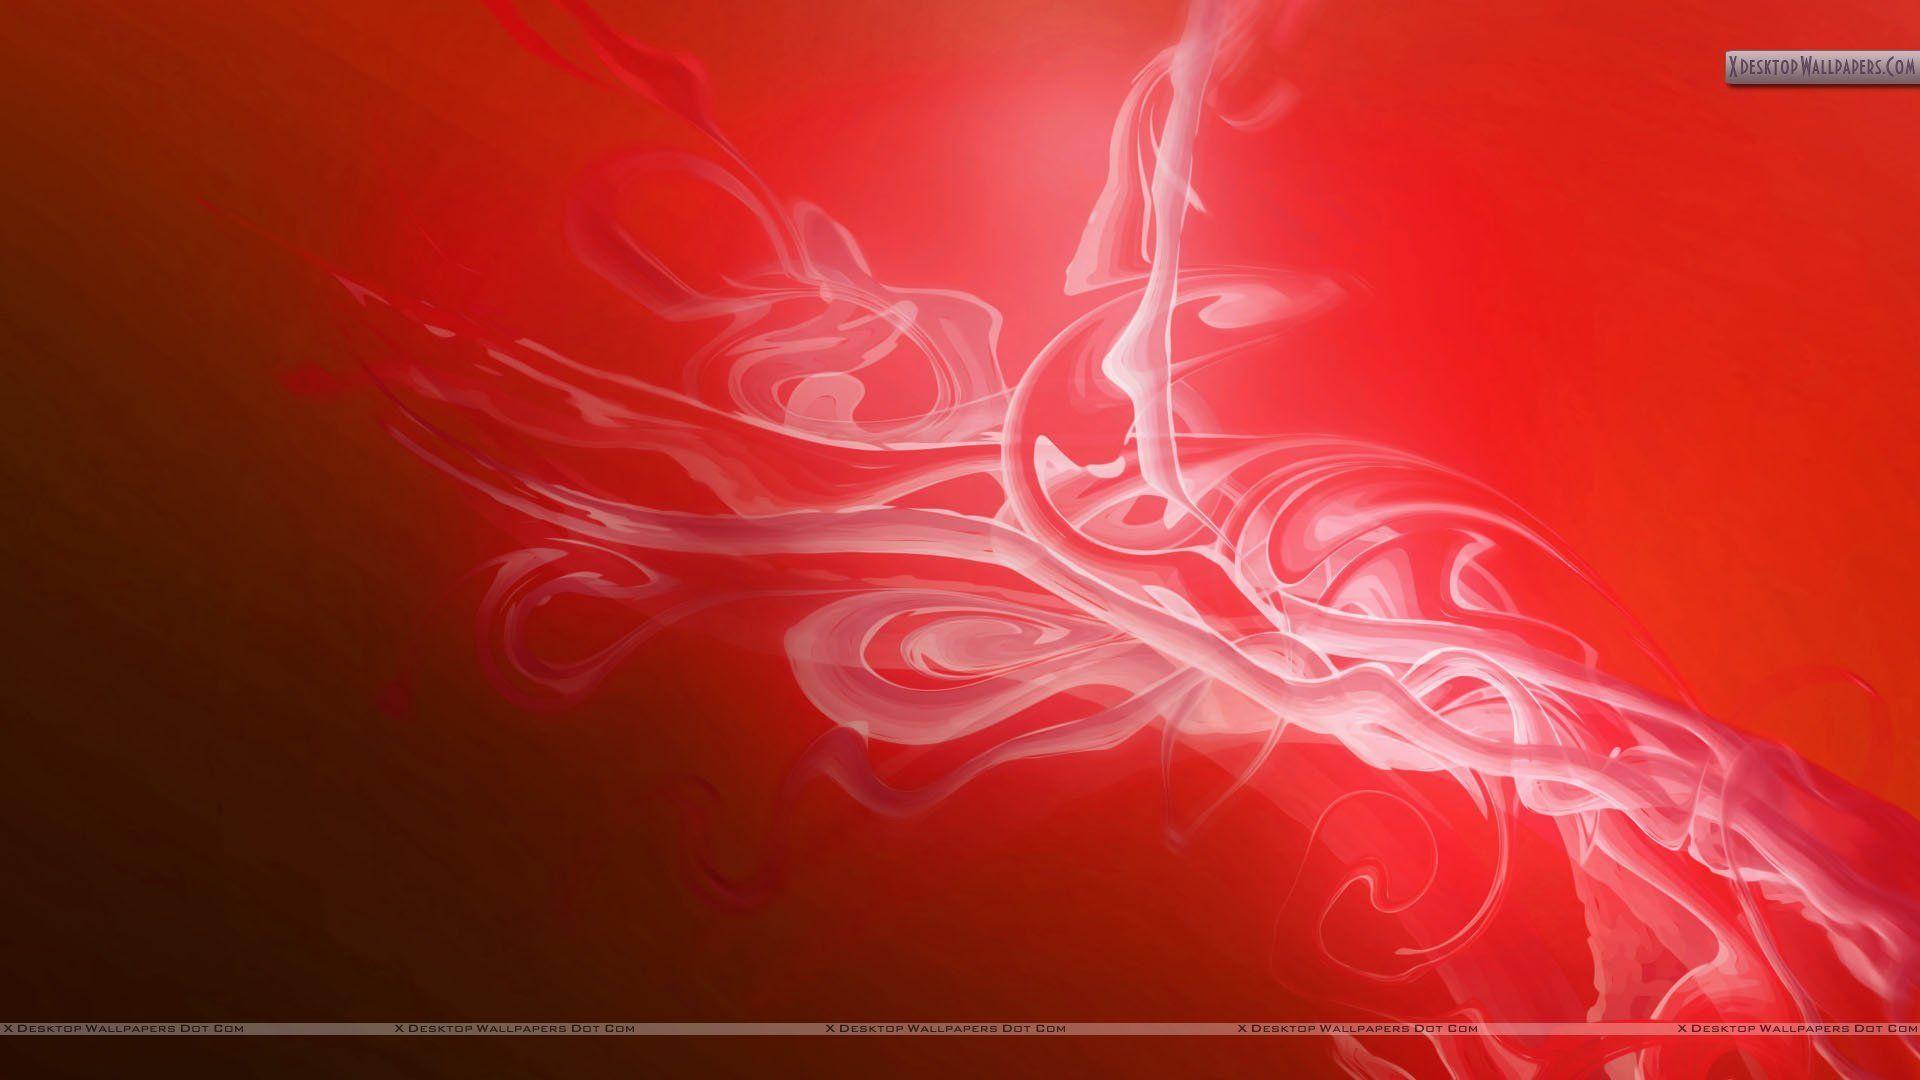 Red And White Backgrounds - Wallpaper Cave